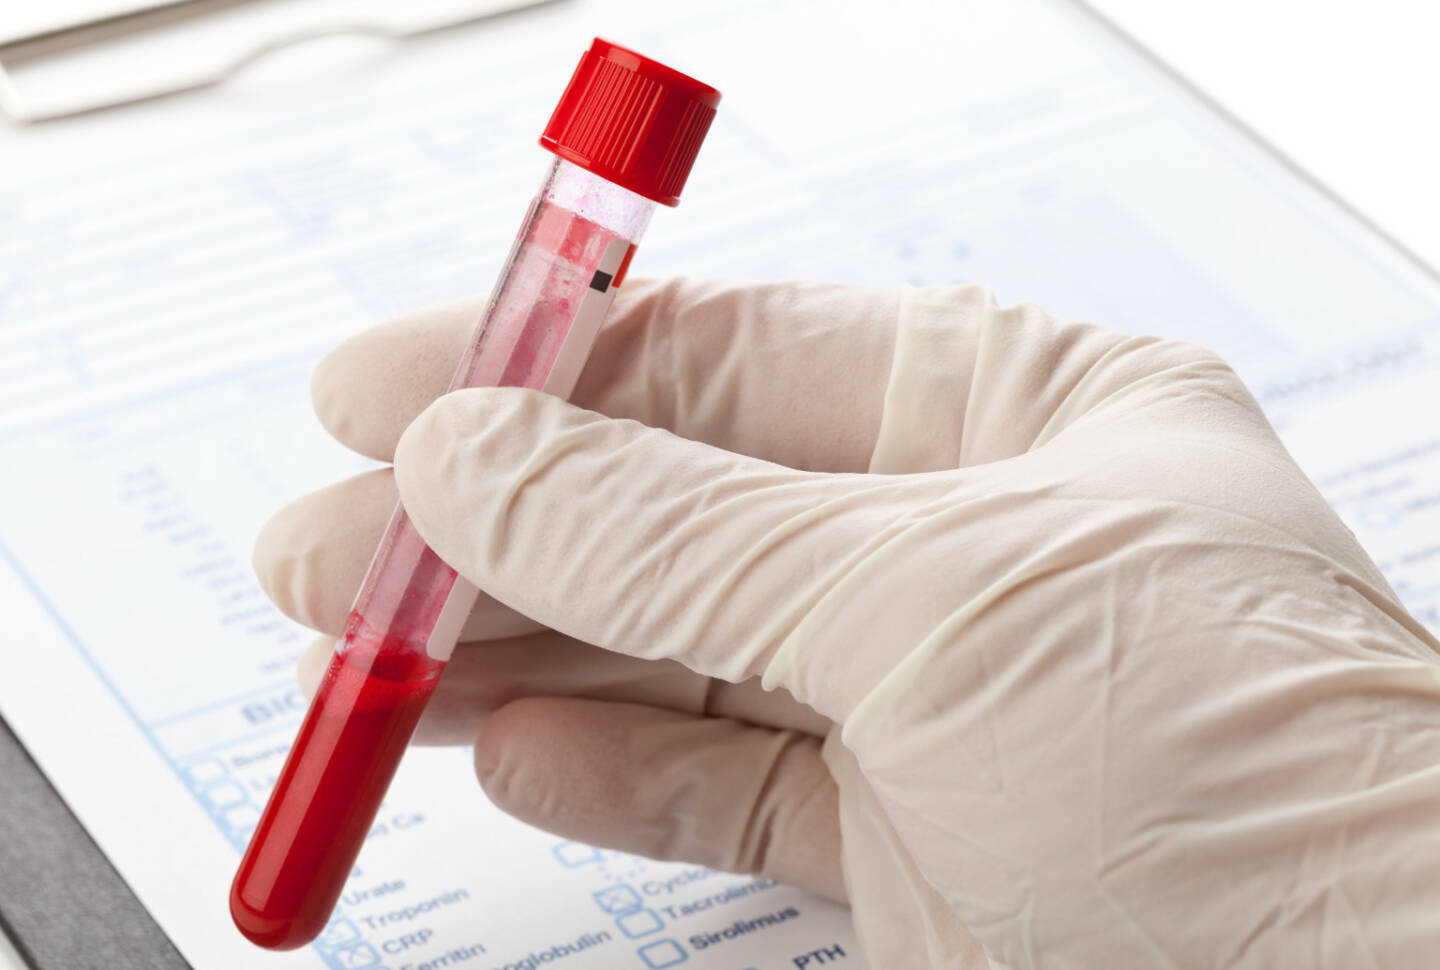 Blut, Blutprobe, Latex Handschuh http://www.shutterstock.com/de/pic-173050052/stock-photo-hand-with-latex-glove-holding-blood-sample-vial-in-front-of-blood-test-form.html